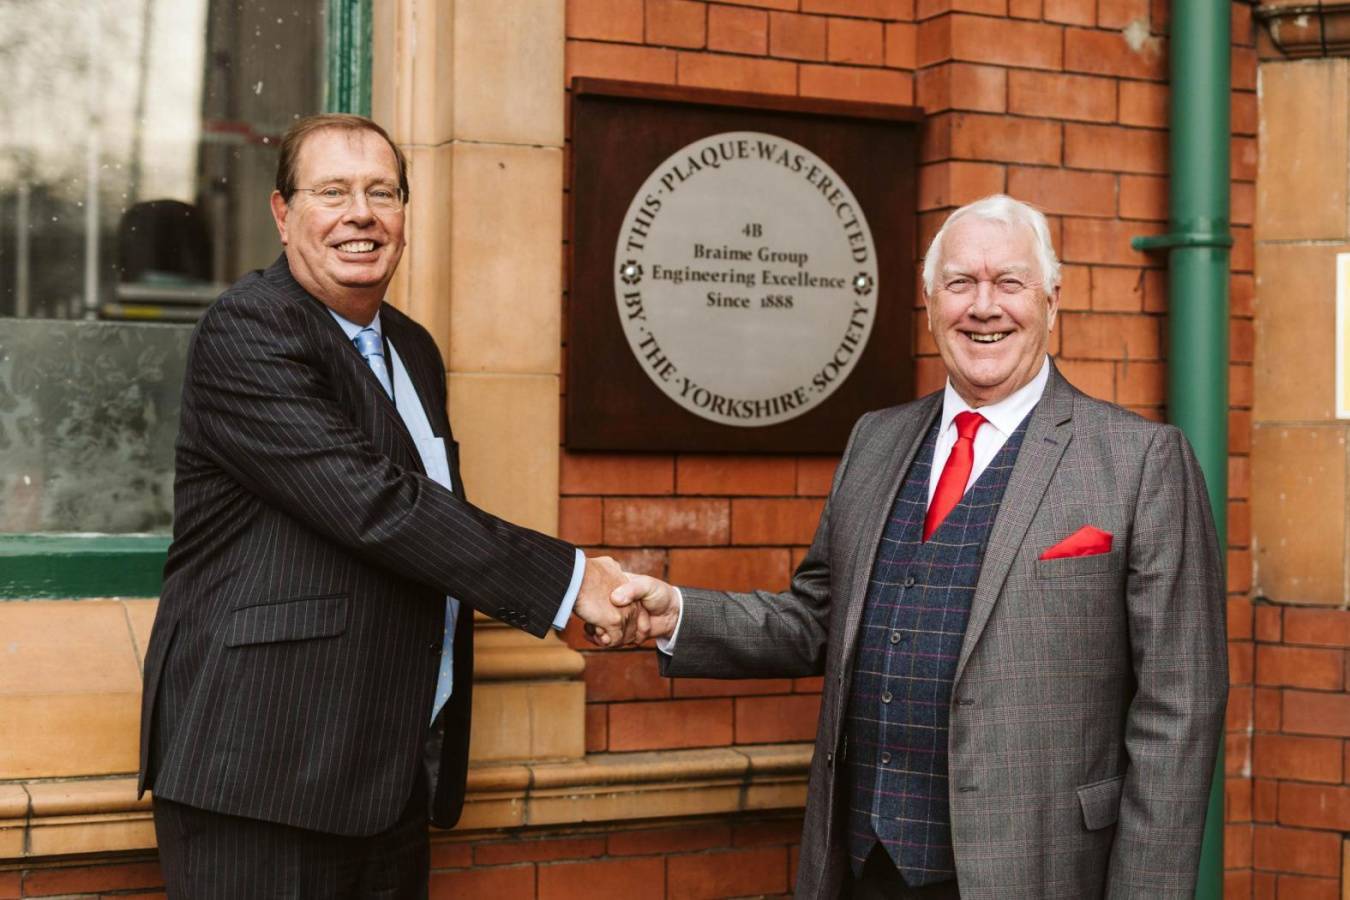 4B Braime Group awarded Yorkshire Plaque of Engineering Excellence